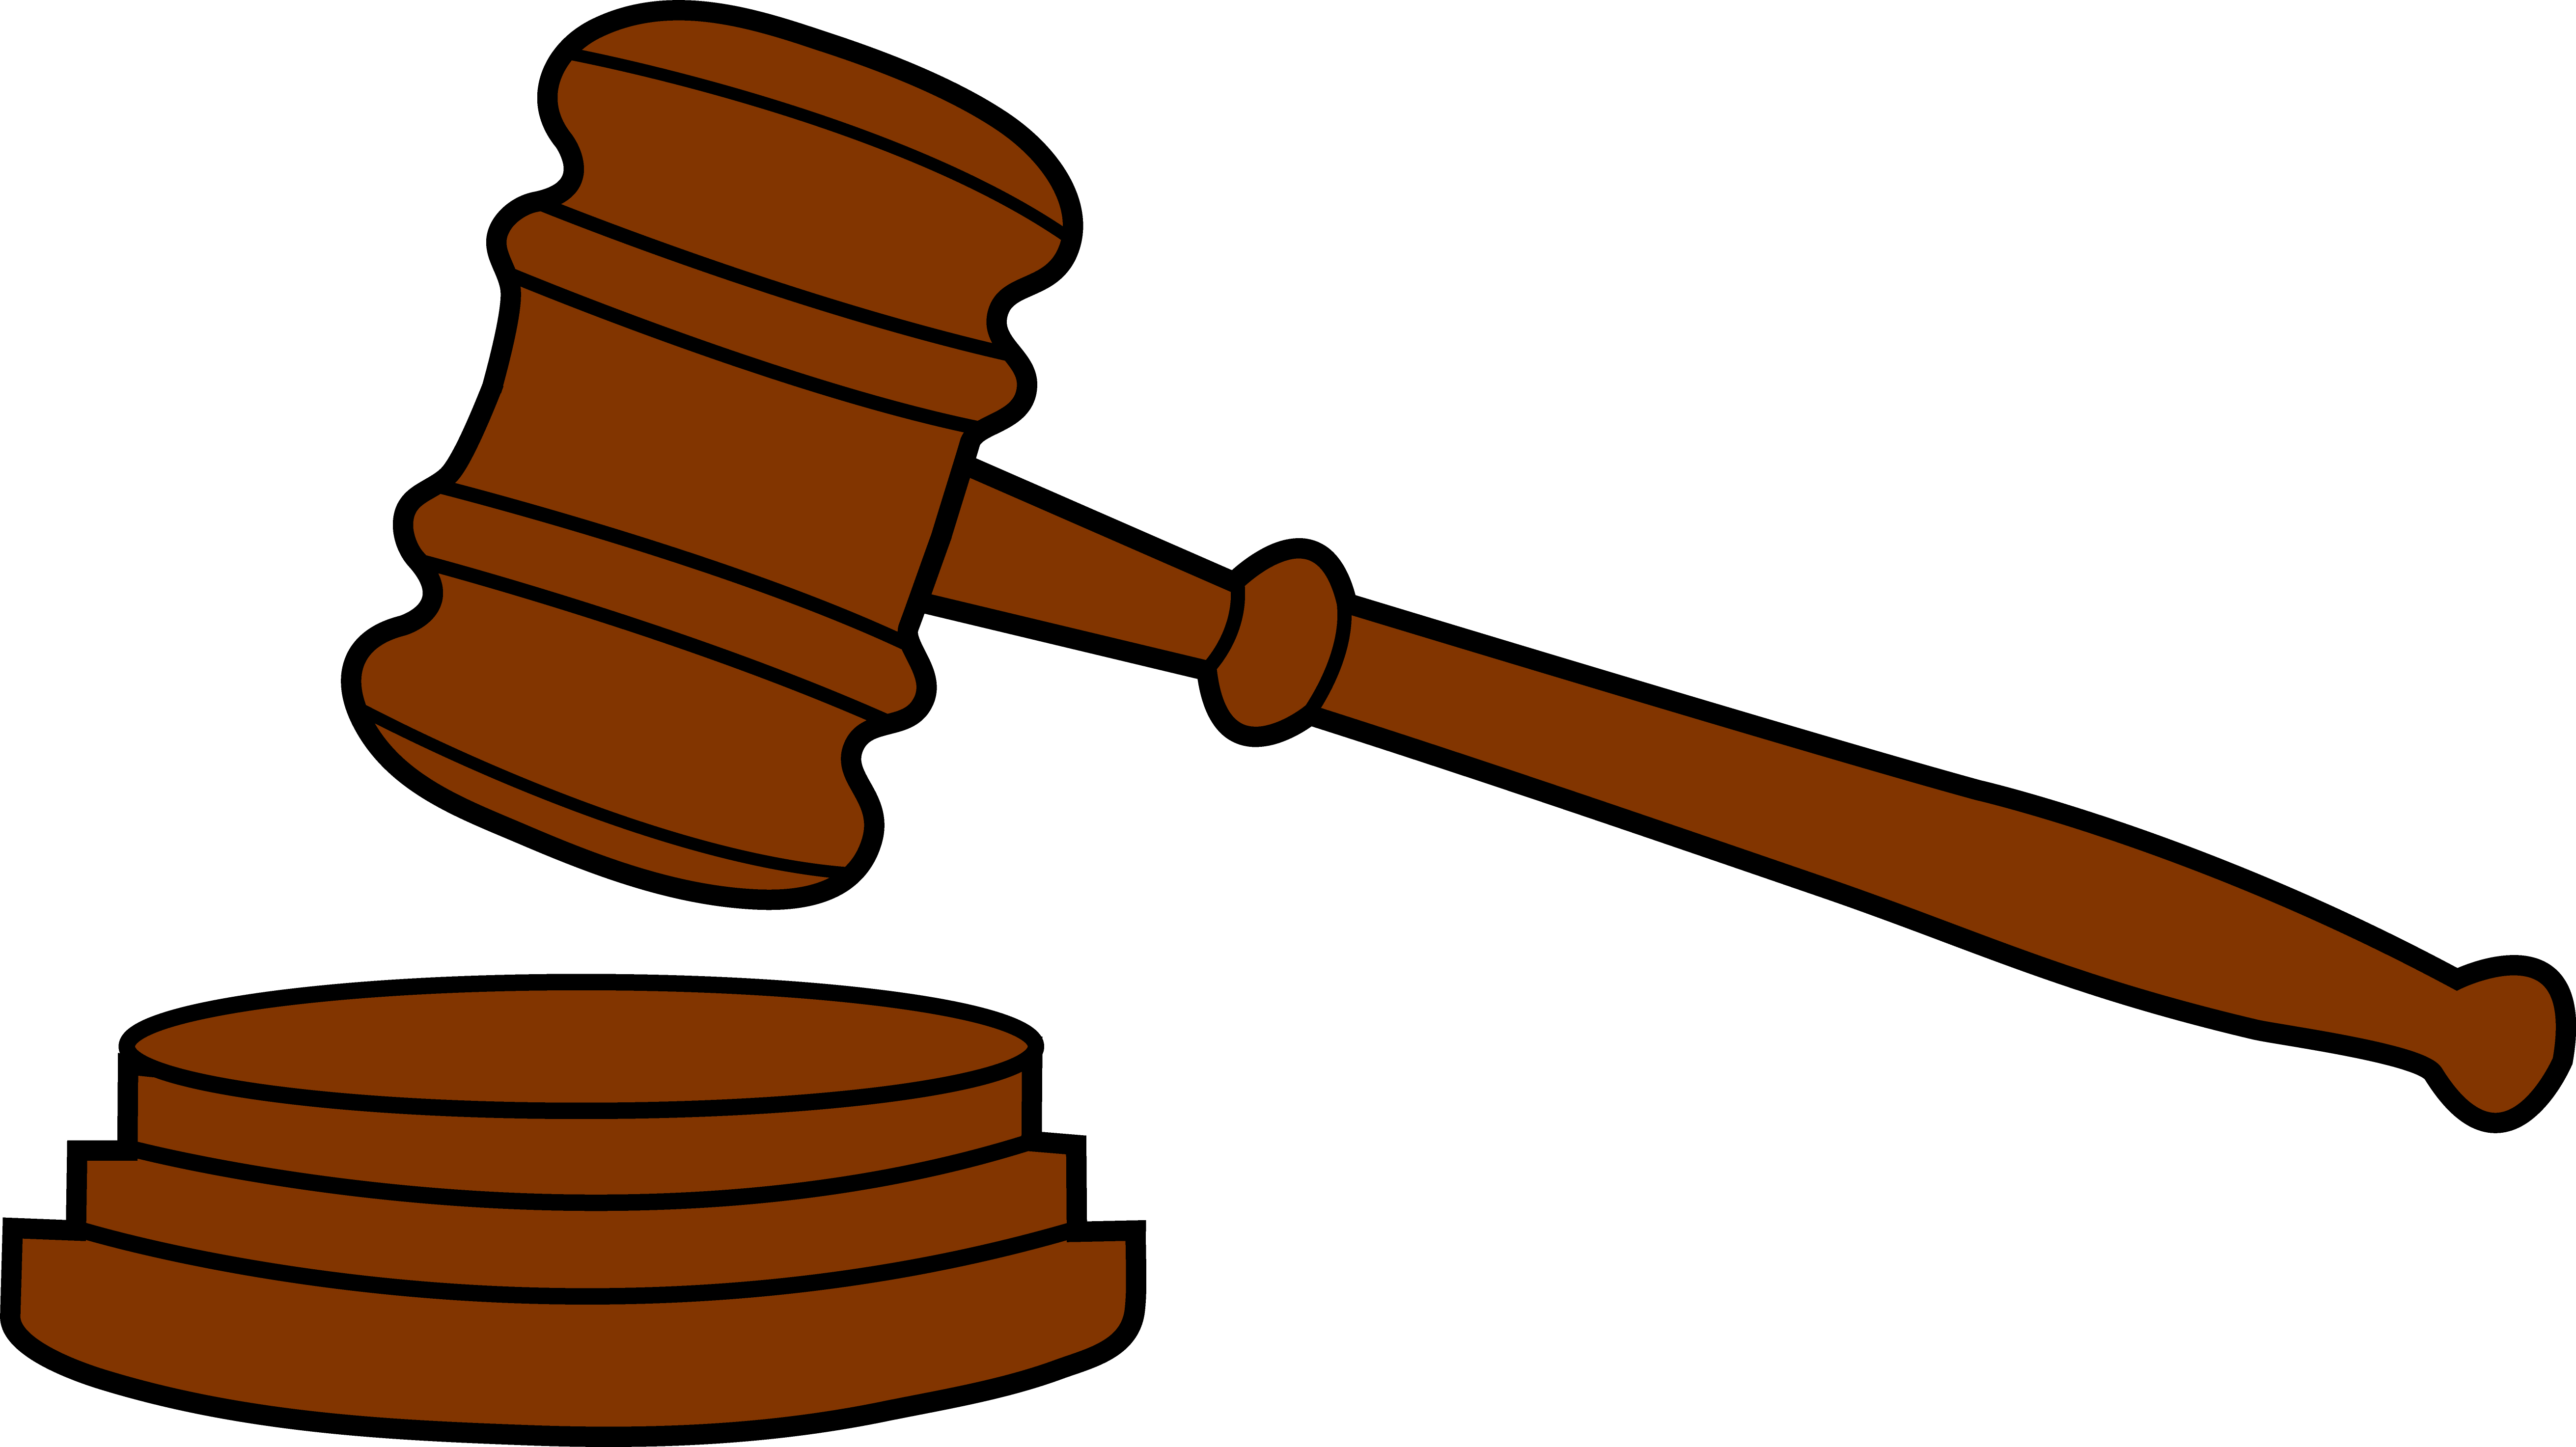 Free Images Of Law Symbols - ClipArt Best